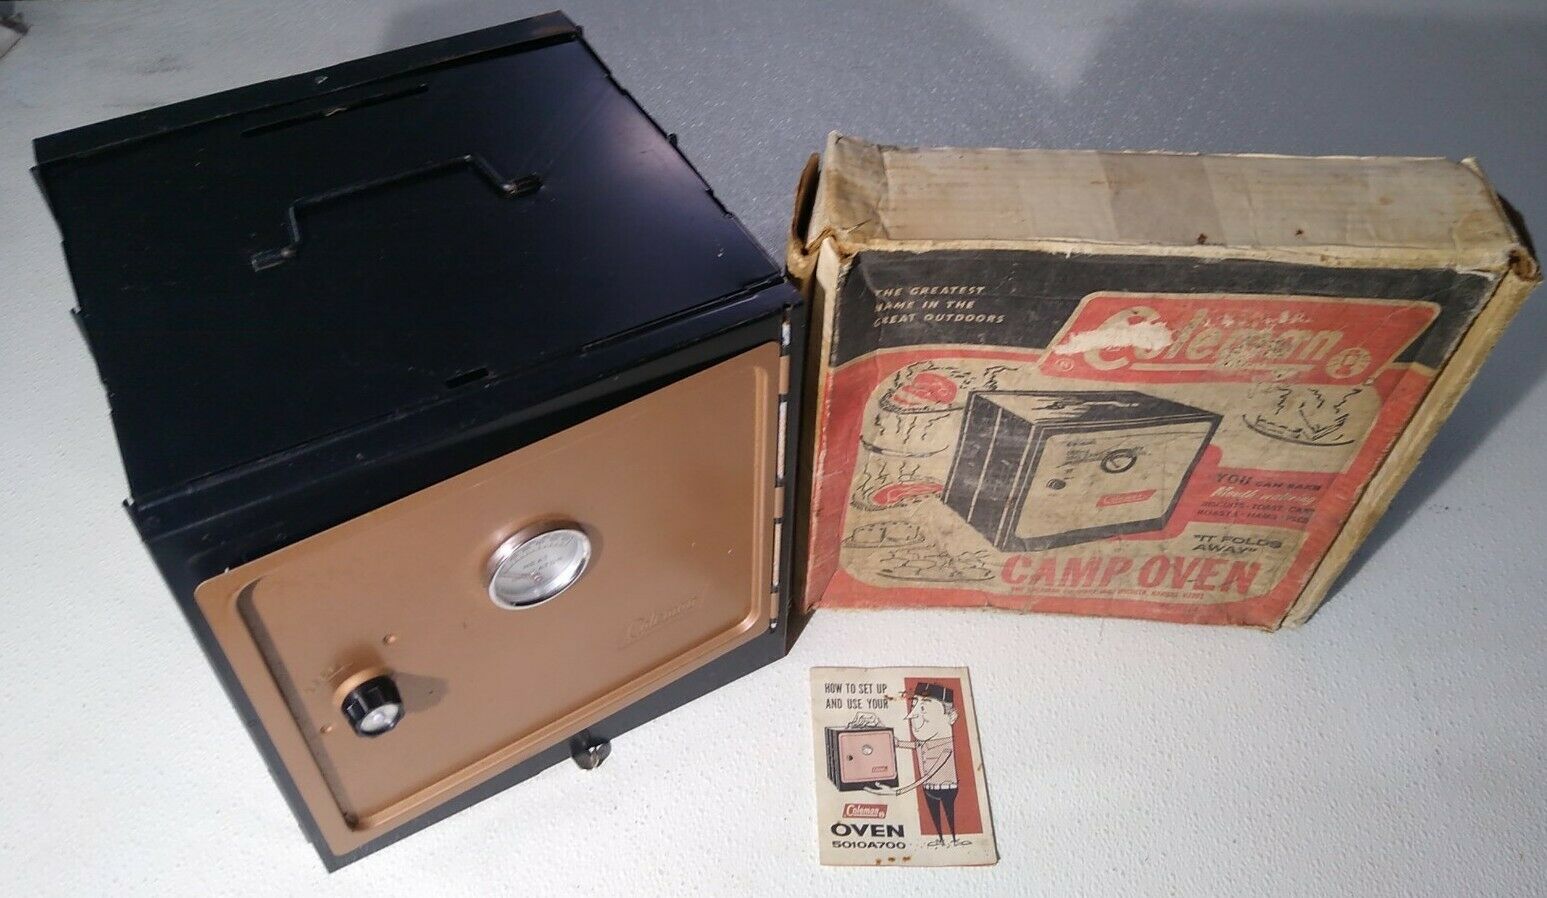 Vintage Coleman Foldable Camp Oven 5010a700 With Original Box